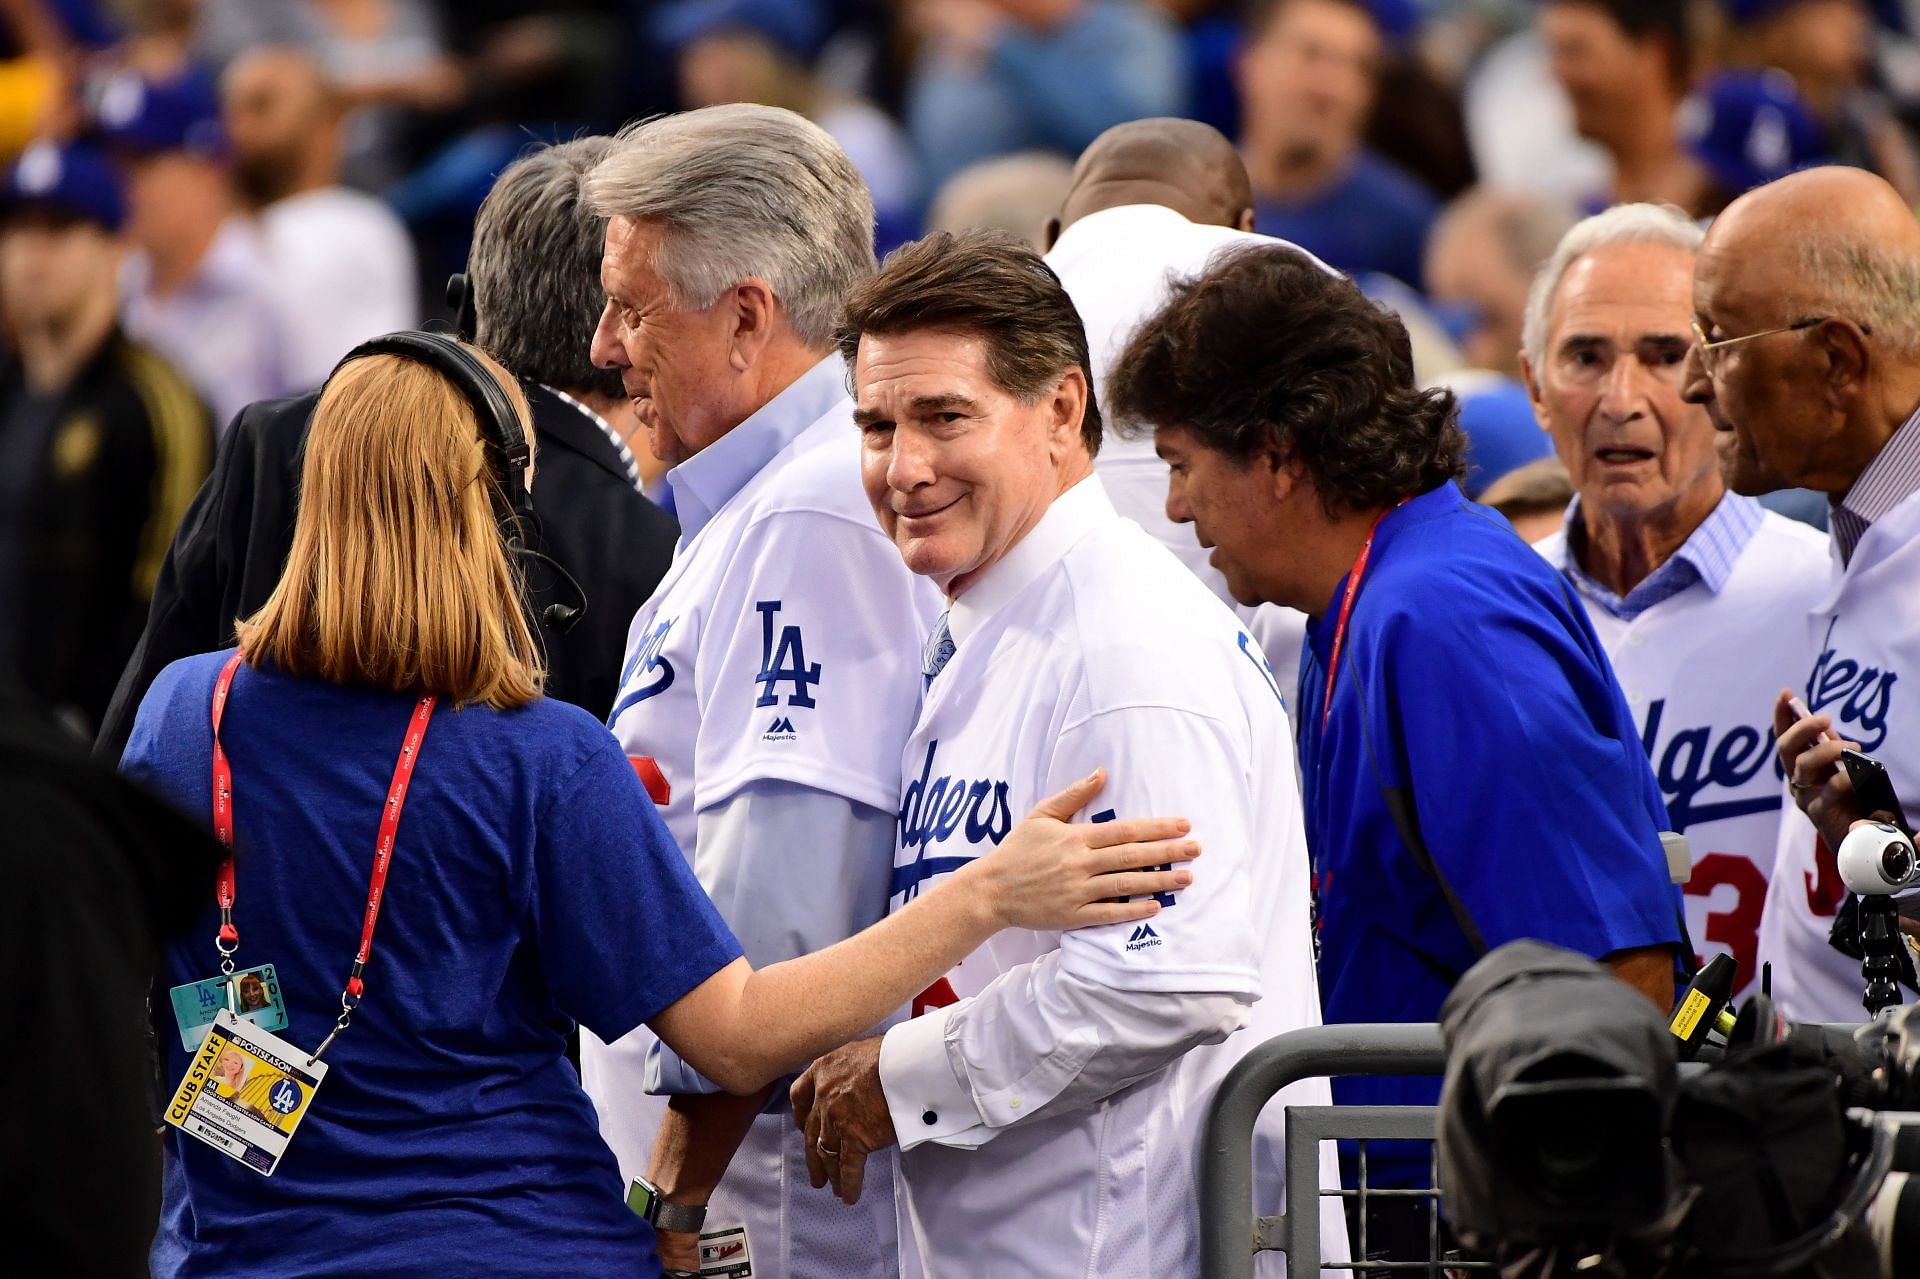 Steve Garvey faces a tall task getting to office